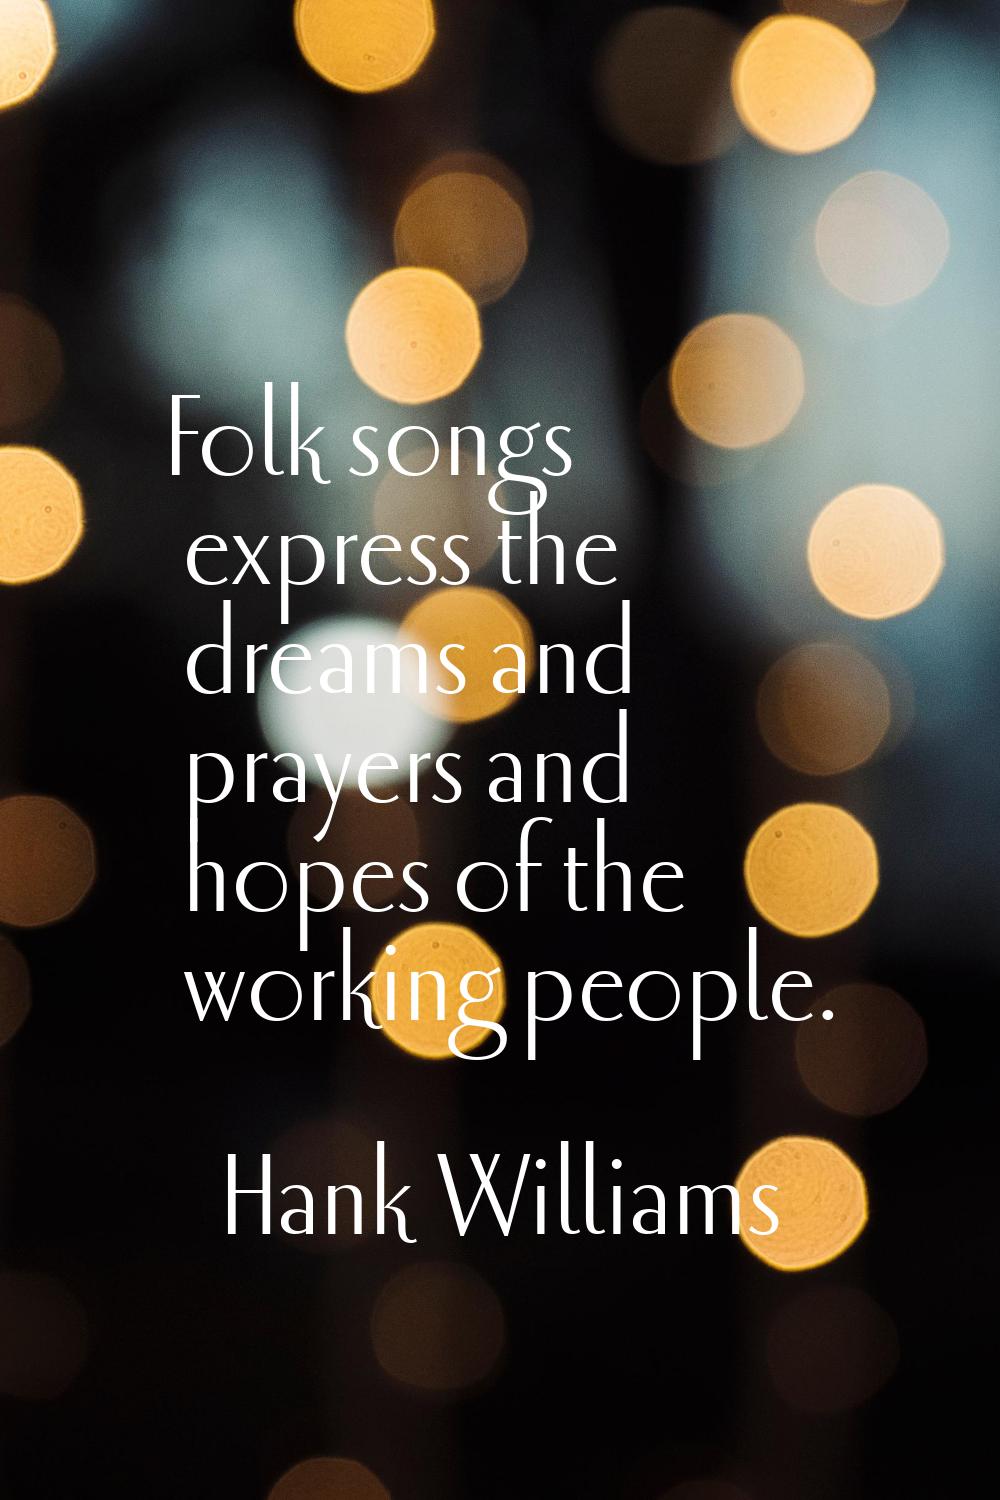 Folk songs express the dreams and prayers and hopes of the working people.